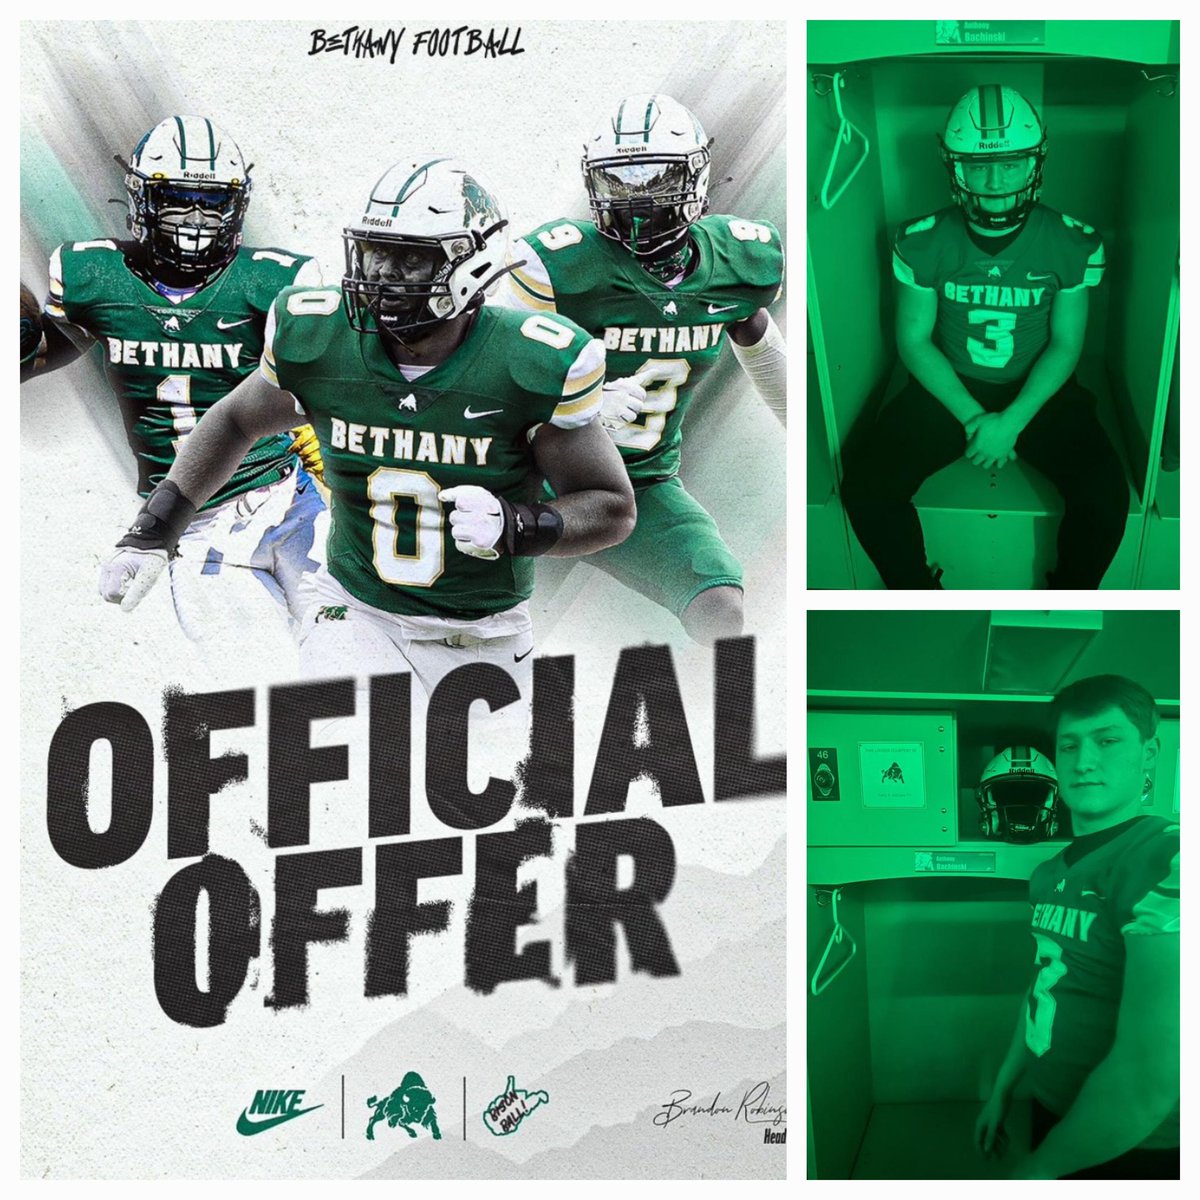 Feels good to know a local College sees hometown possibilities!! Great feeling to get the Offer!!! @BethanyWVFB @CoachRobBC @CoachRancBC @coachR_Brown @CoachStantonBC